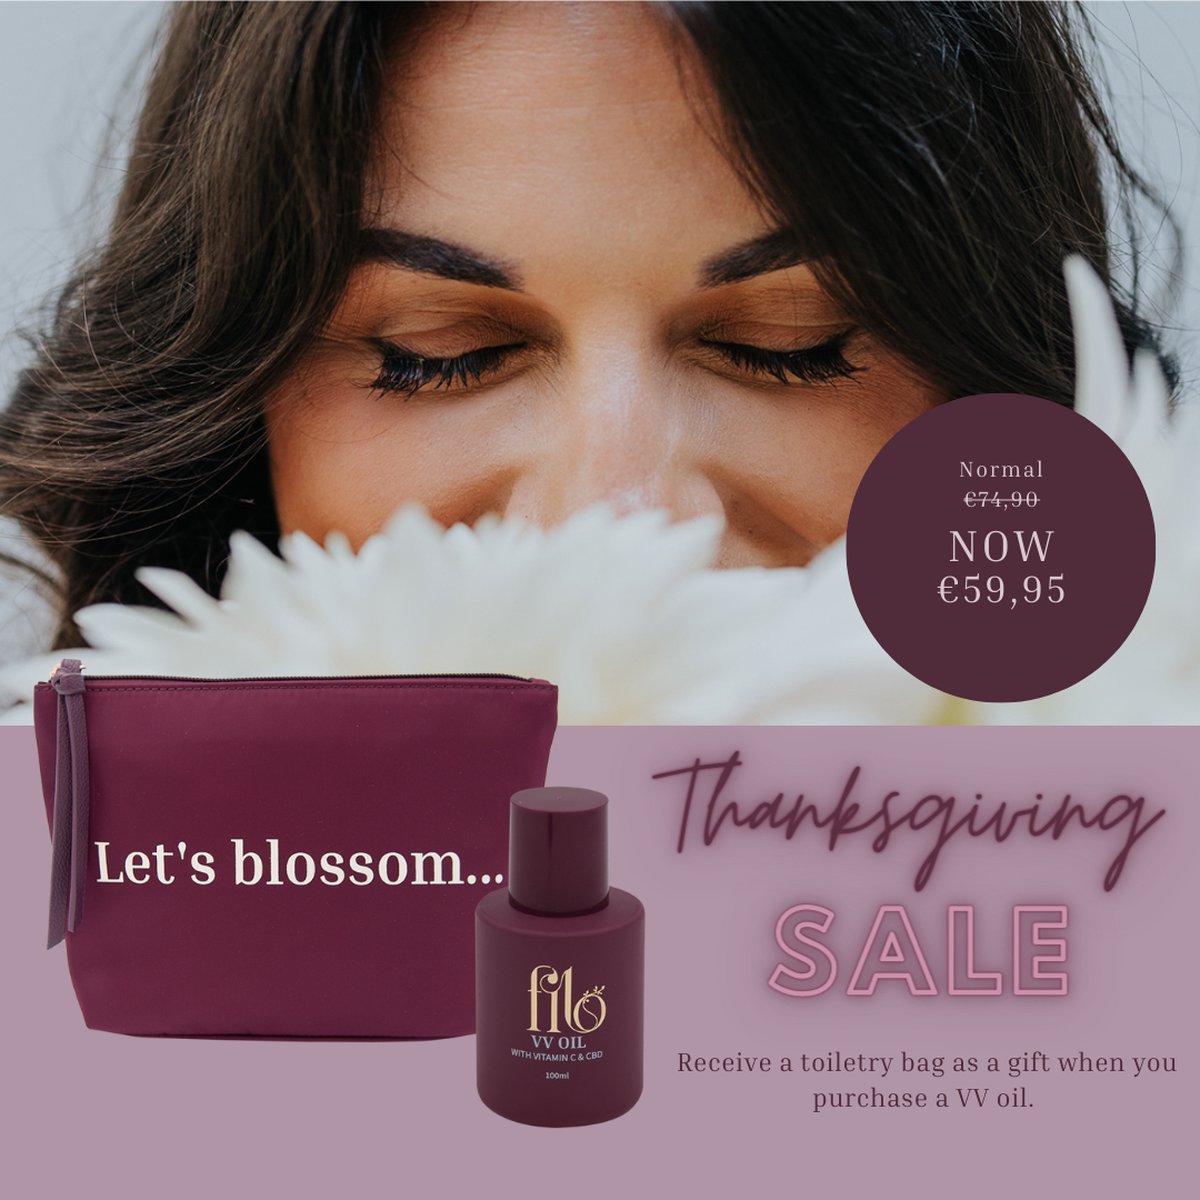 My Own Filo VV Oil with a ''Let's blossom'' Pouch -Thanksgiving Combi Deal - VV Oil met GRATIS ''Let's blossom'' Toilettas